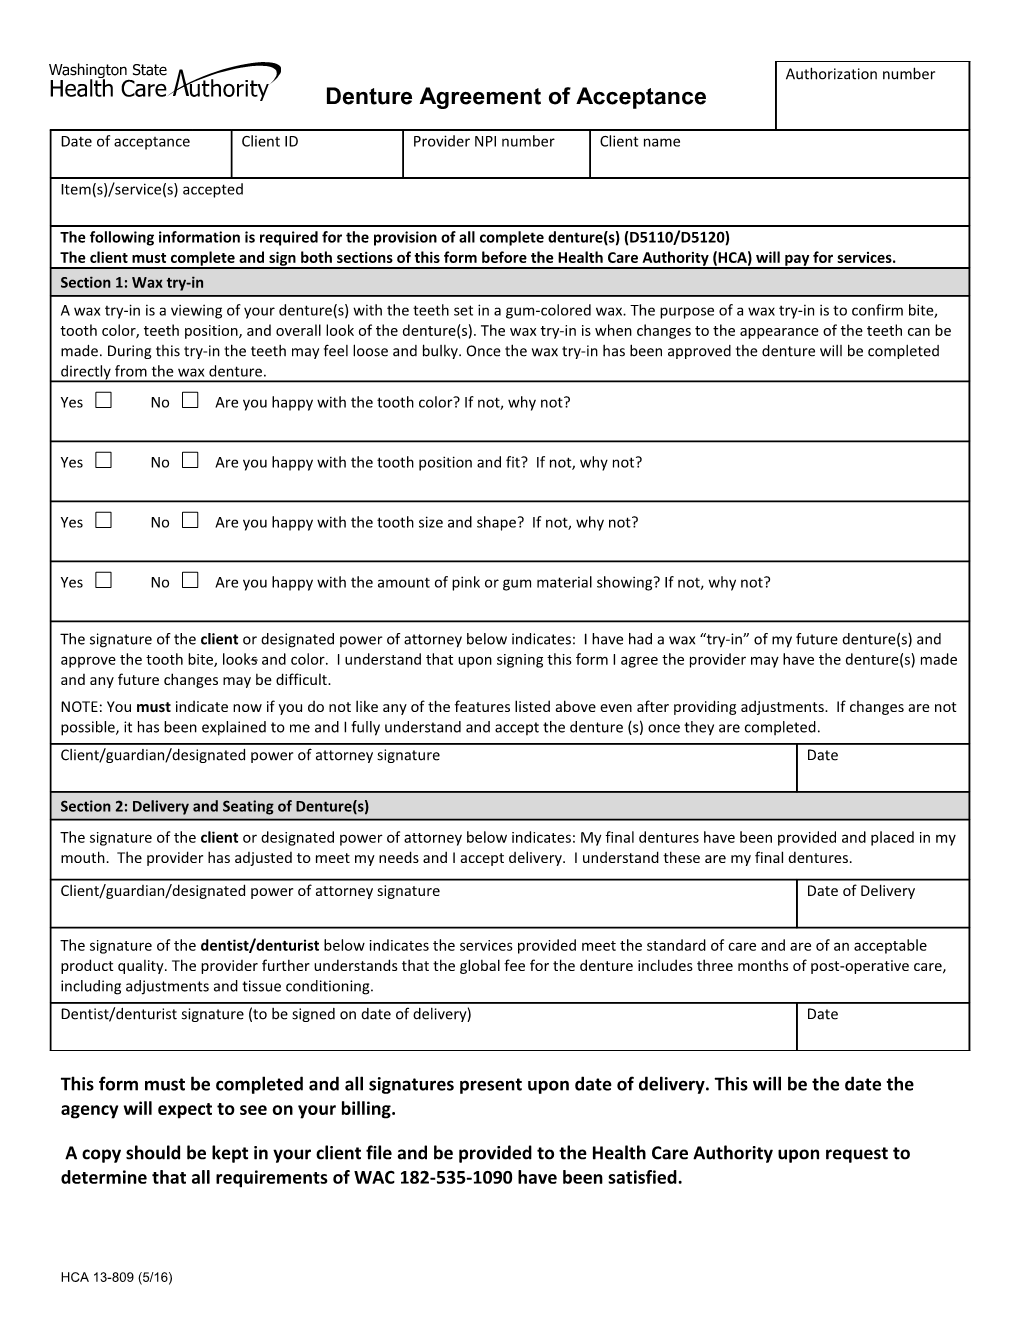 This Form Must Be Completed and All Signatures Present Upon Date of Delivery. This Will